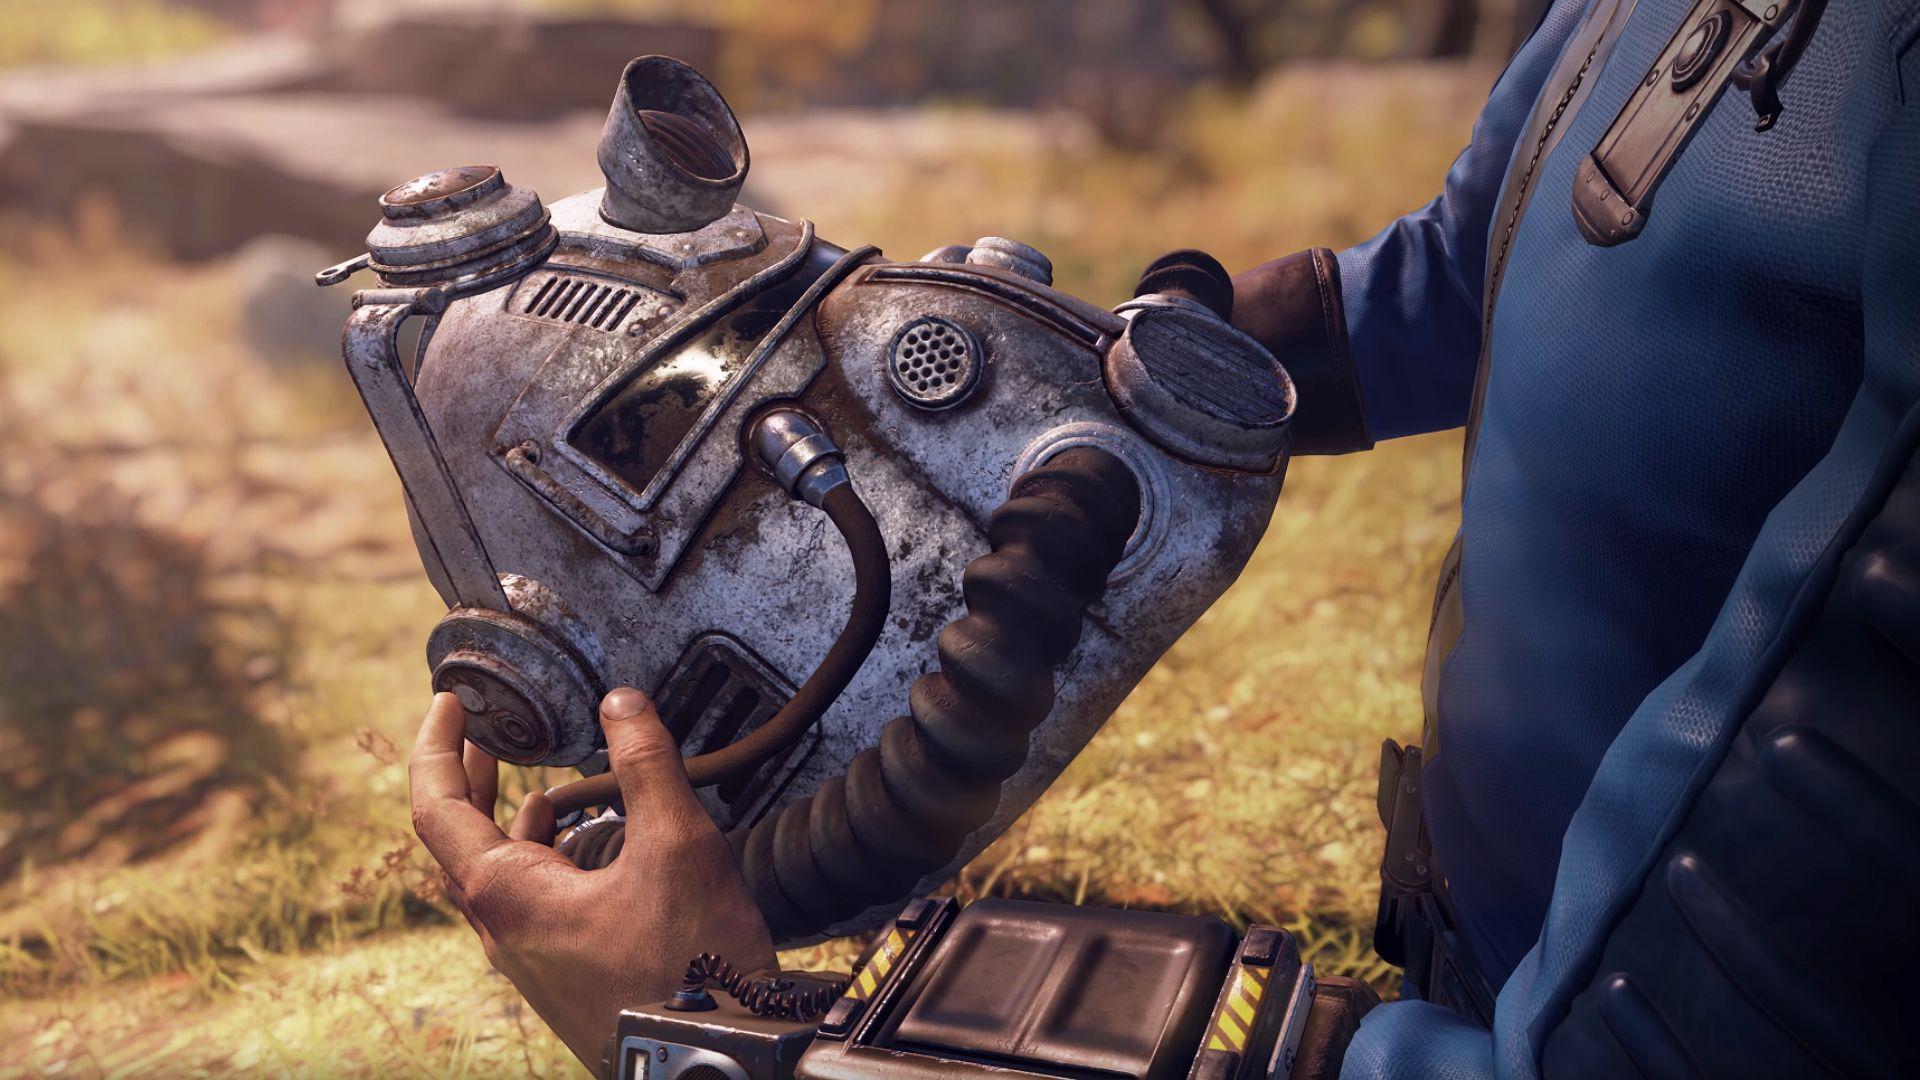 Fallout 76 release date and multiplayer news – all the latest